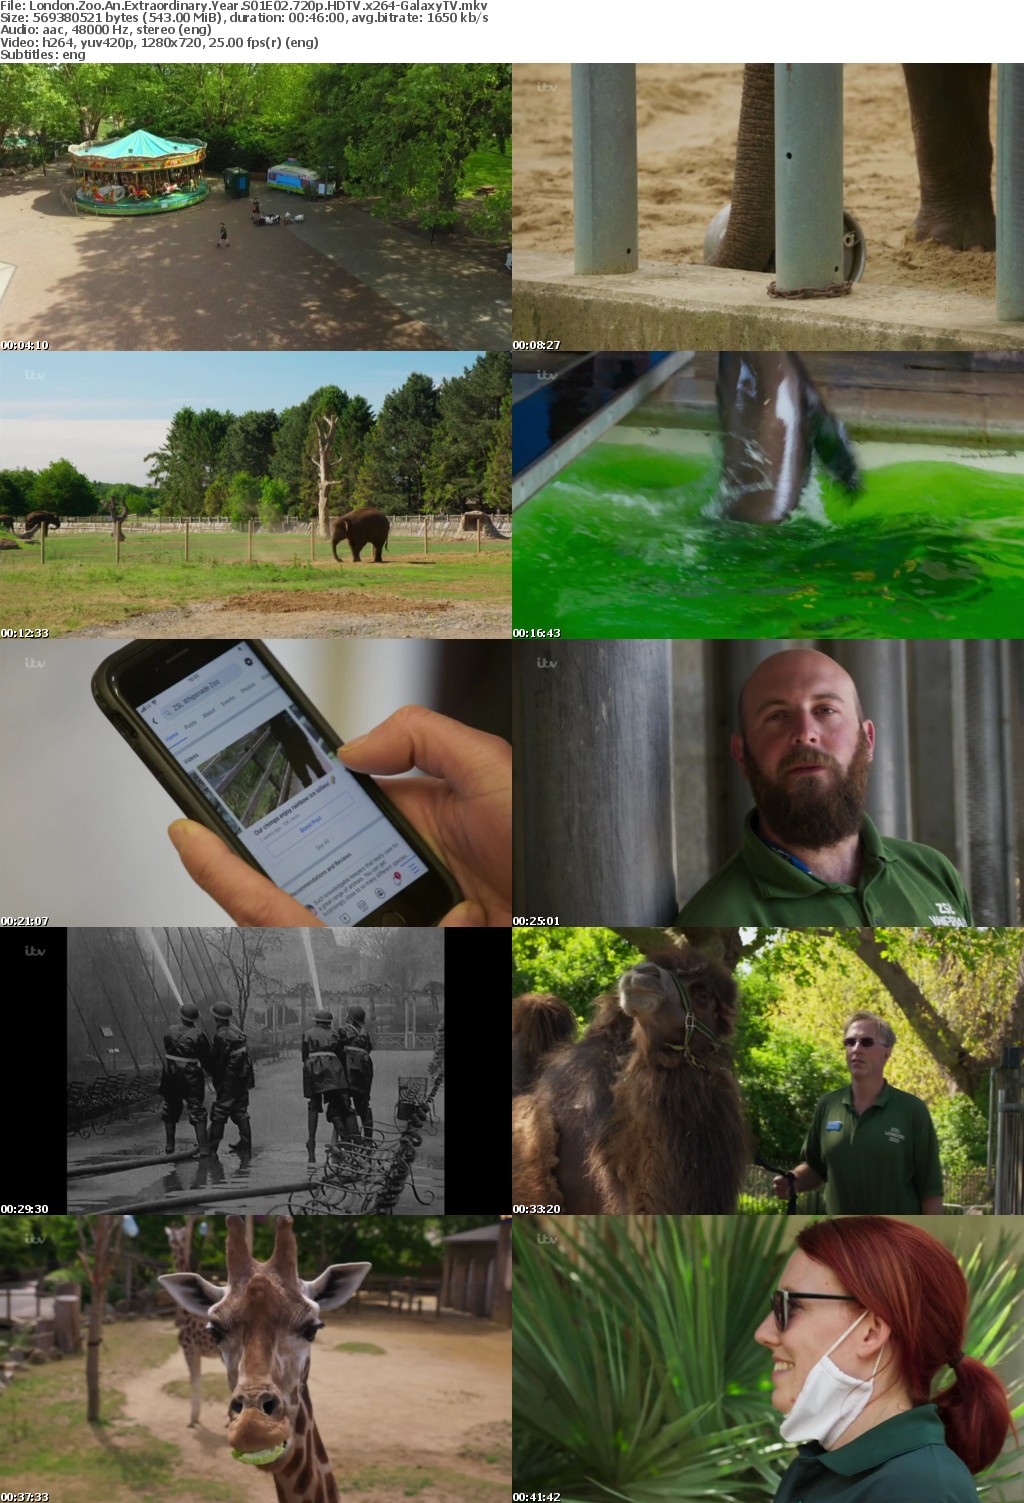 London Zoo An Extraordinary Year S01 COMPLETE 720p HDTV x264-GalaxyTV